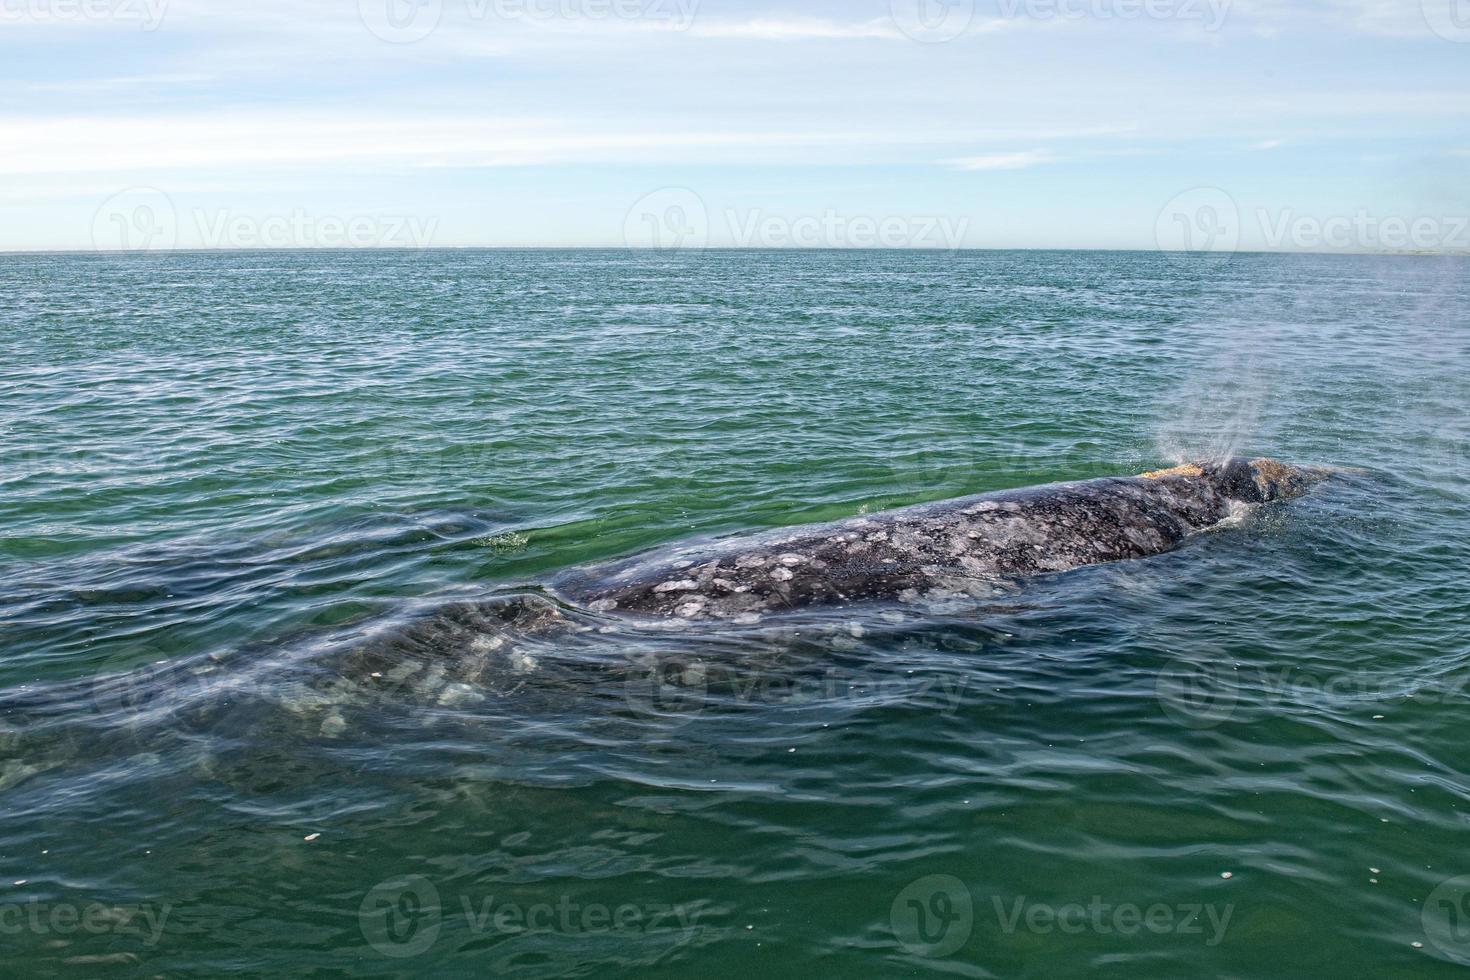 grey whale mother and calf in the Pacific ocean photo